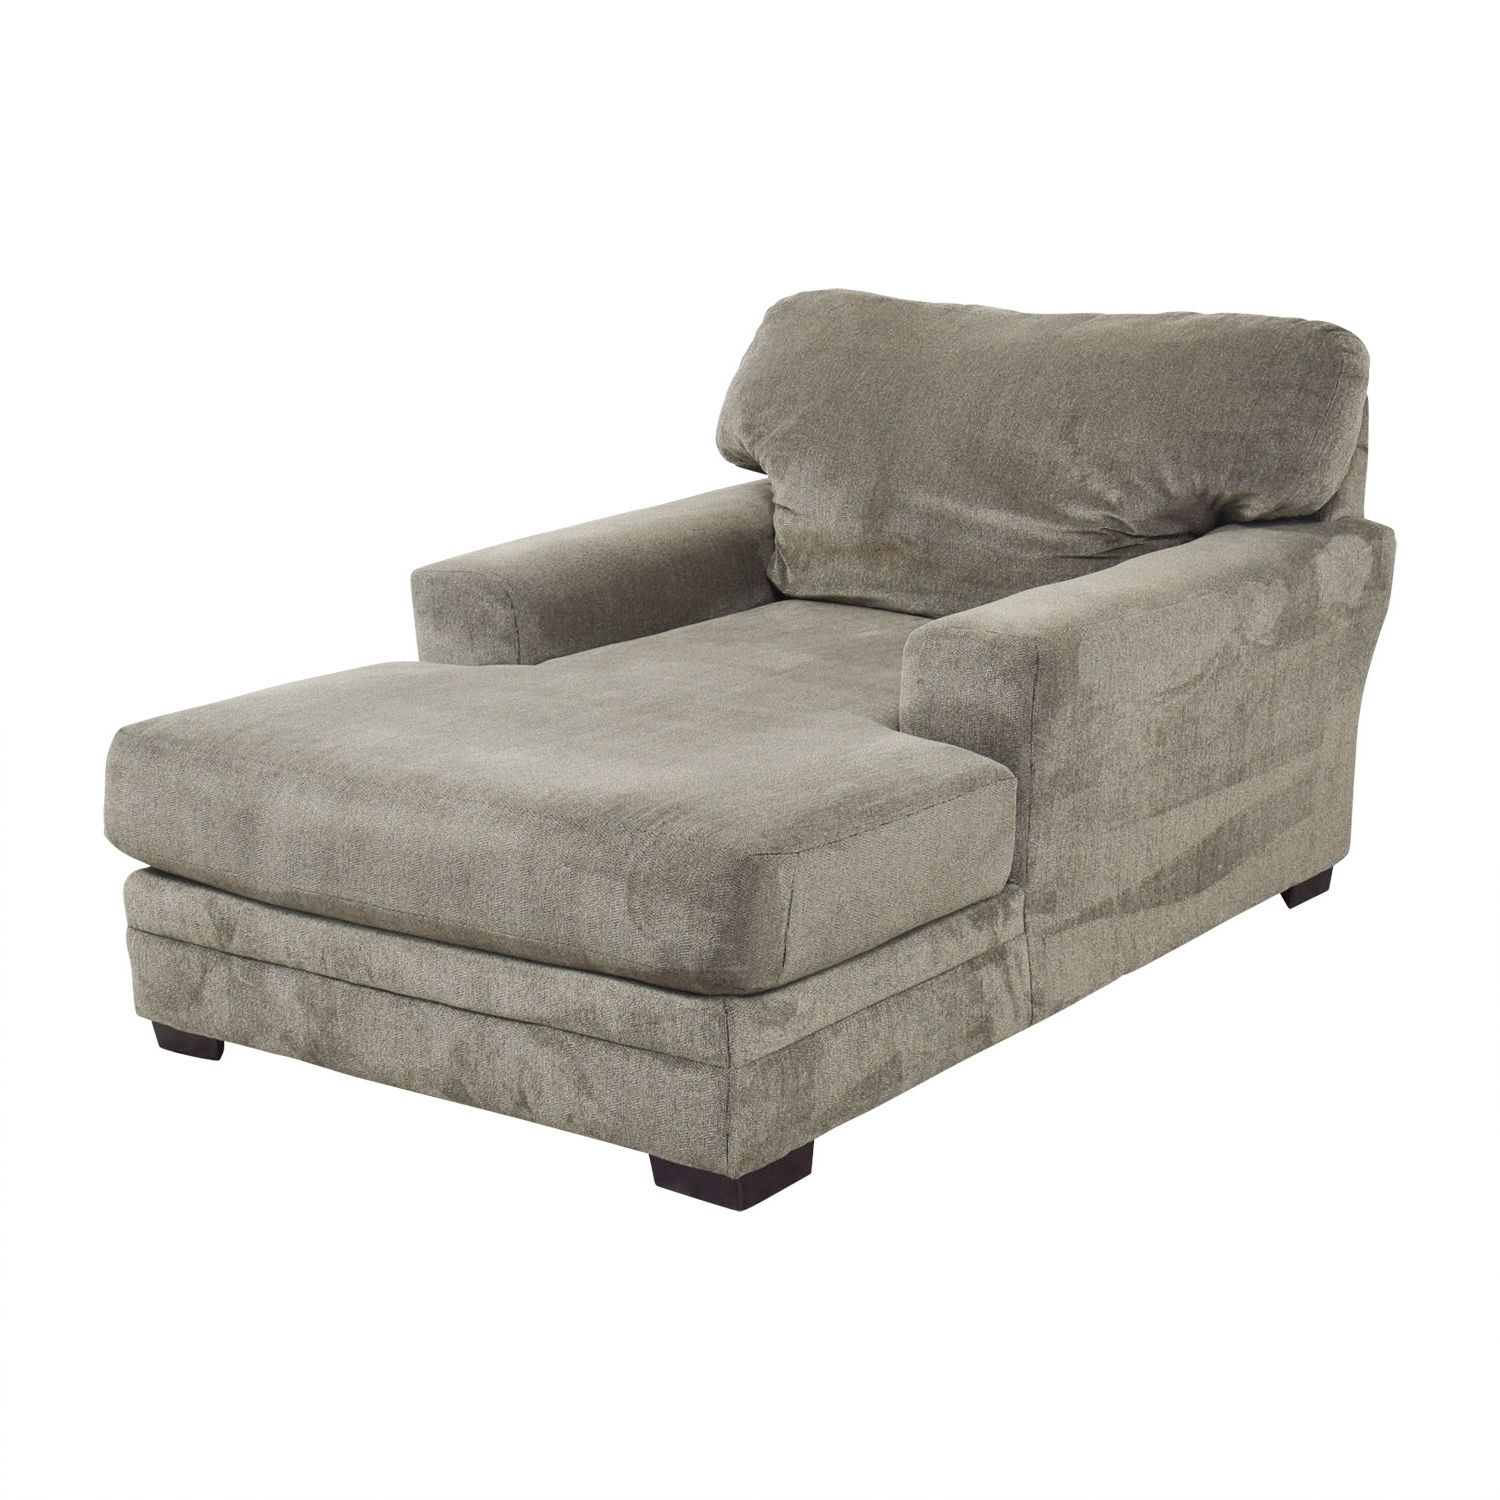 [%81% Off – Bob's Furniture Bob's Furniture Grey Chaise Lounge / Sofas With Preferred Grey Chaise Lounges|grey Chaise Lounges For Most Popular 81% Off – Bob's Furniture Bob's Furniture Grey Chaise Lounge / Sofas|famous Grey Chaise Lounges With Regard To 81% Off – Bob's Furniture Bob's Furniture Grey Chaise Lounge / Sofas|favorite 81% Off – Bob's Furniture Bob's Furniture Grey Chaise Lounge / Sofas Regarding Grey Chaise Lounges%] (View 15 of 15)